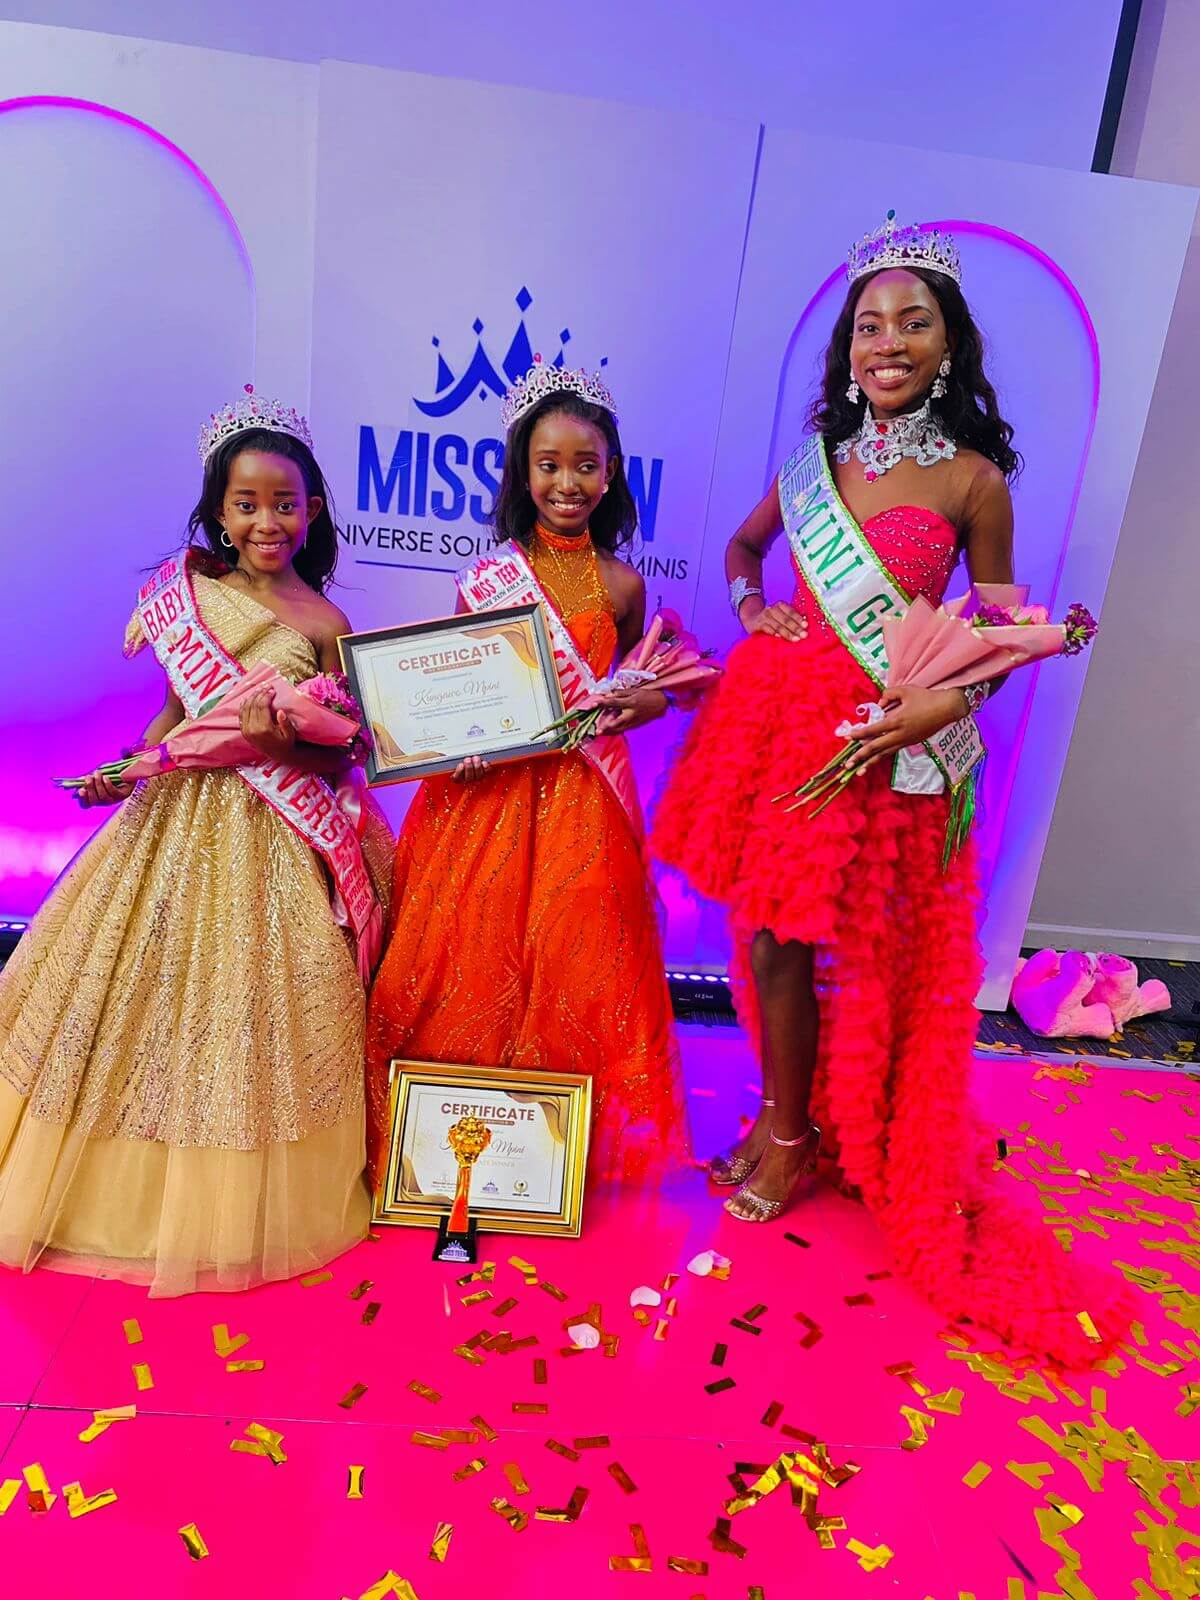 Kwa Bhaca Little Princess Receives Crown as Miss Mini Universe South Africa